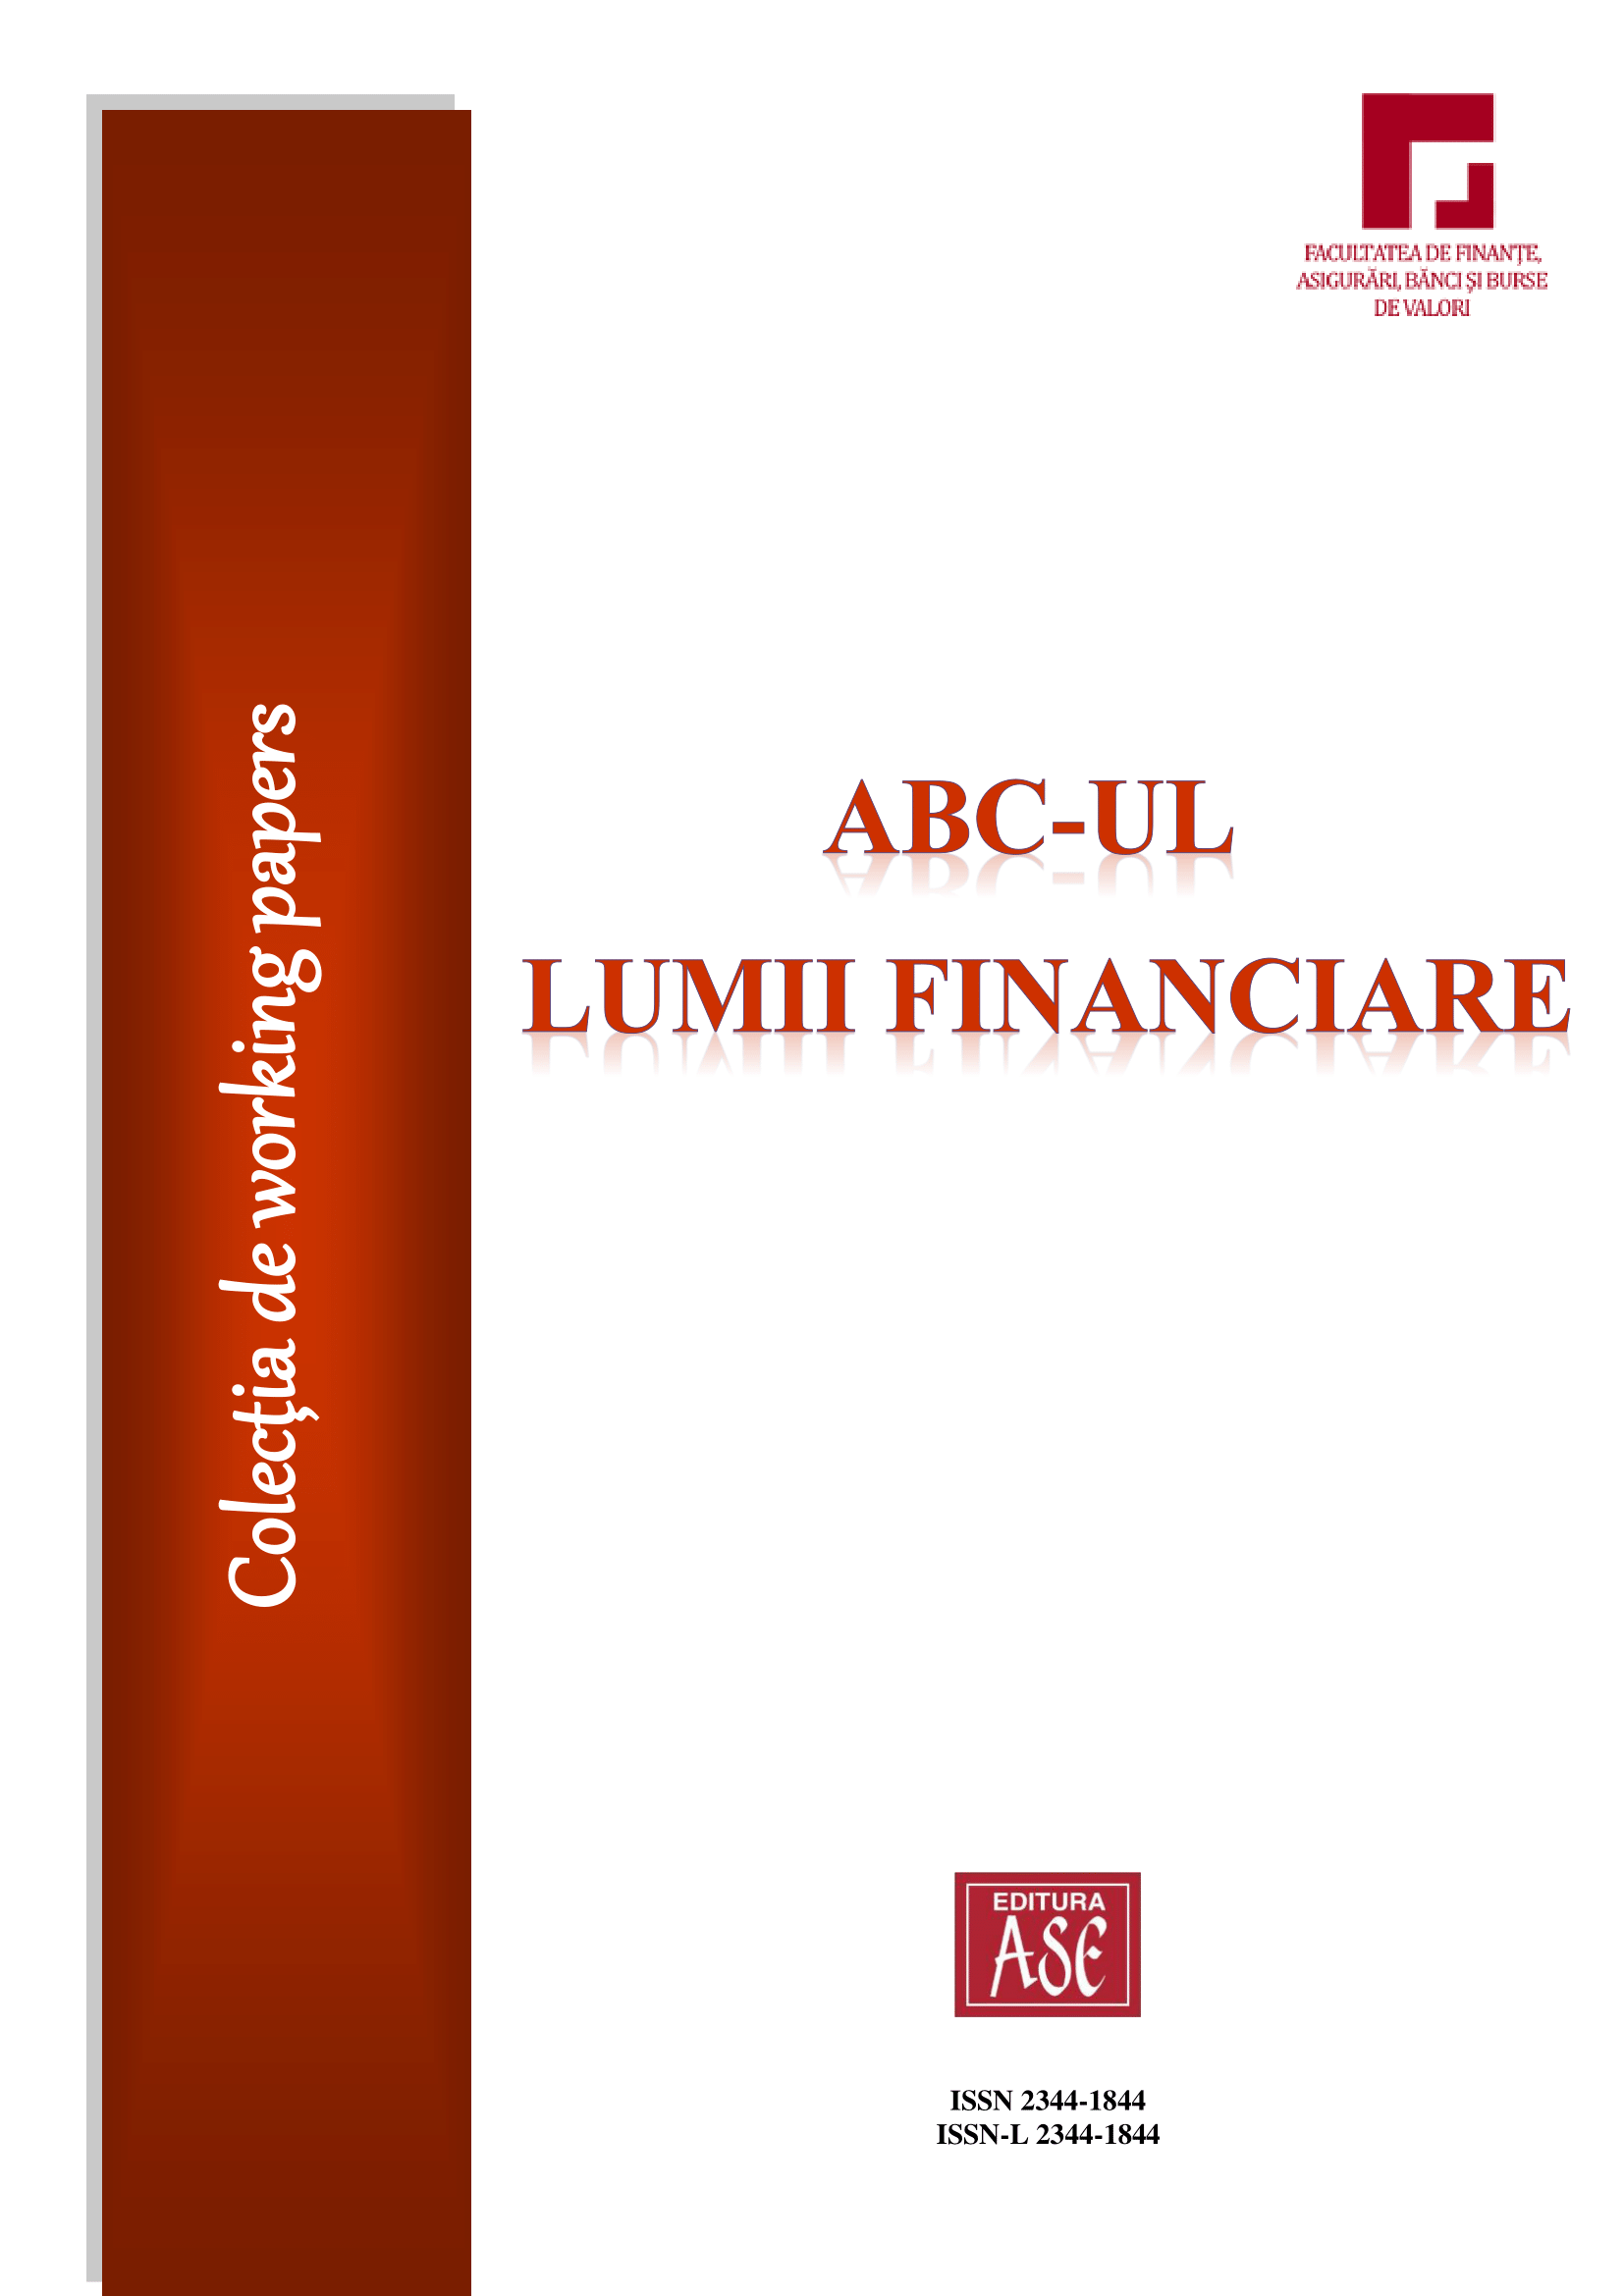 Working papers’ collection "The ABC of the Financial World" Cover Image